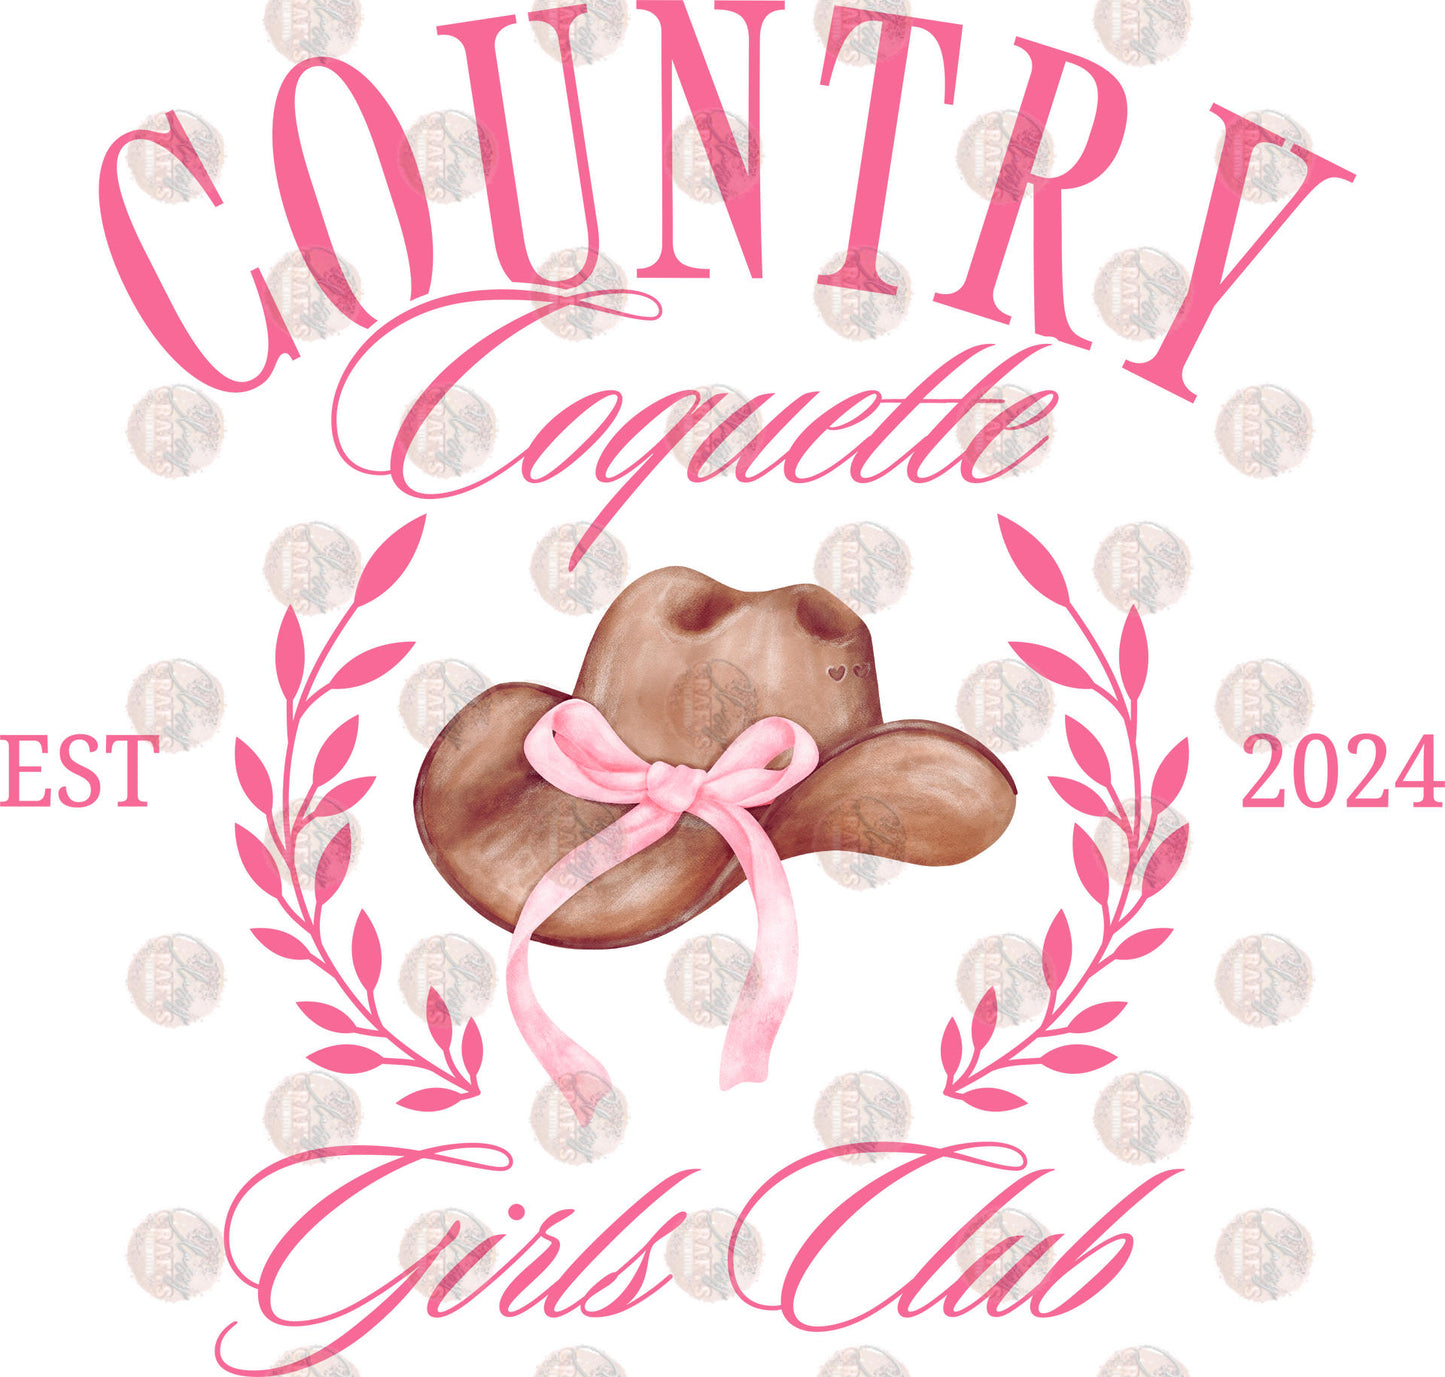 Country Coquette Girls Club Transfer